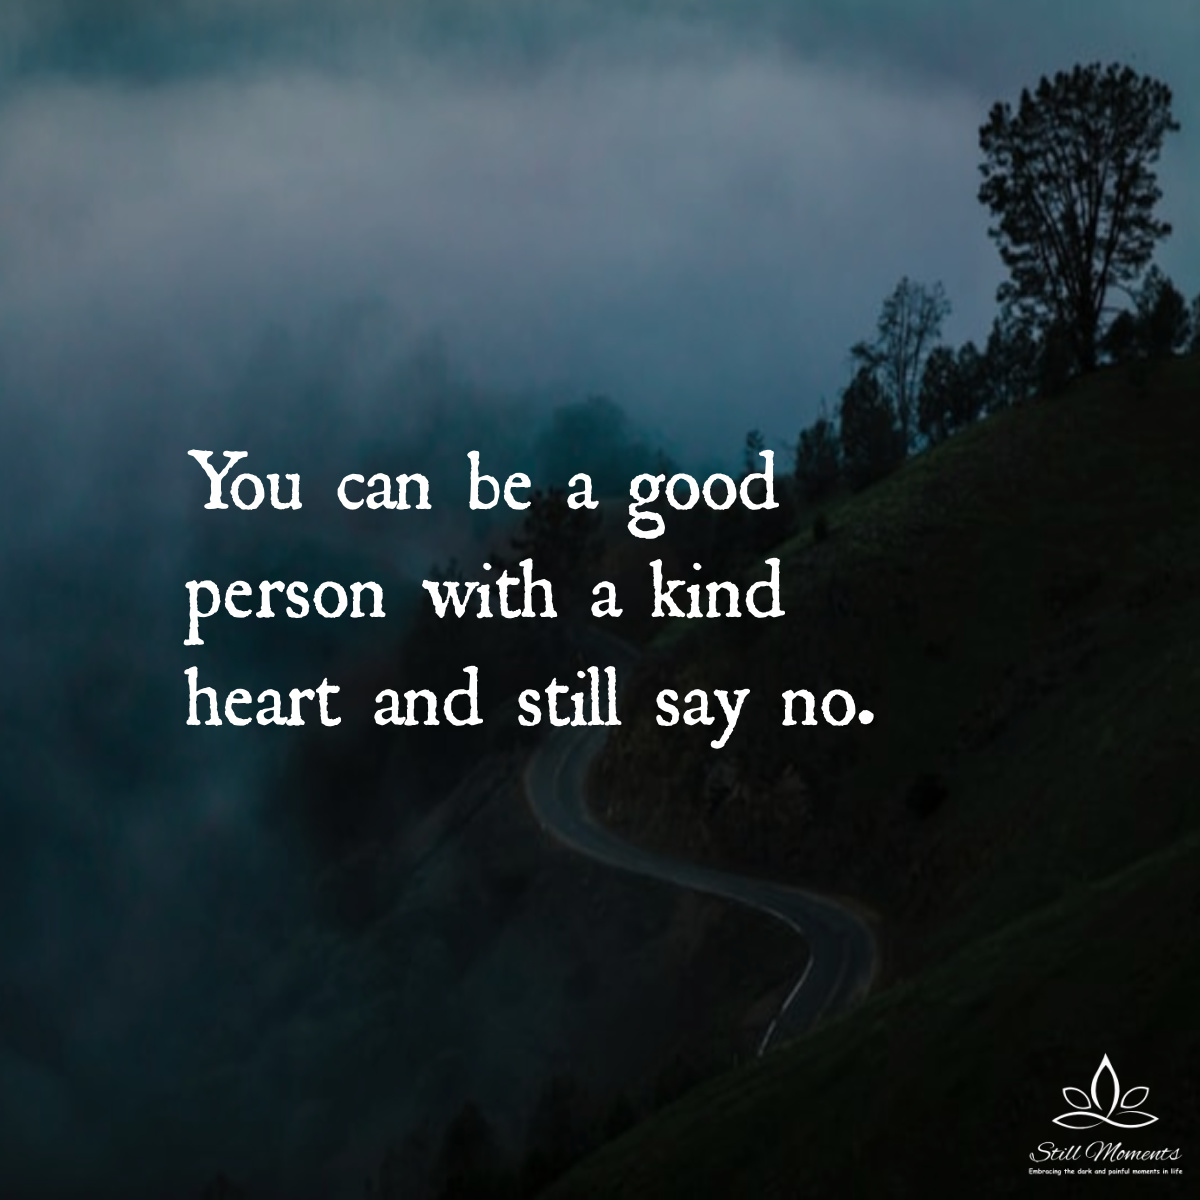 You Can Be a Good Person and Still Say No - Still Moments